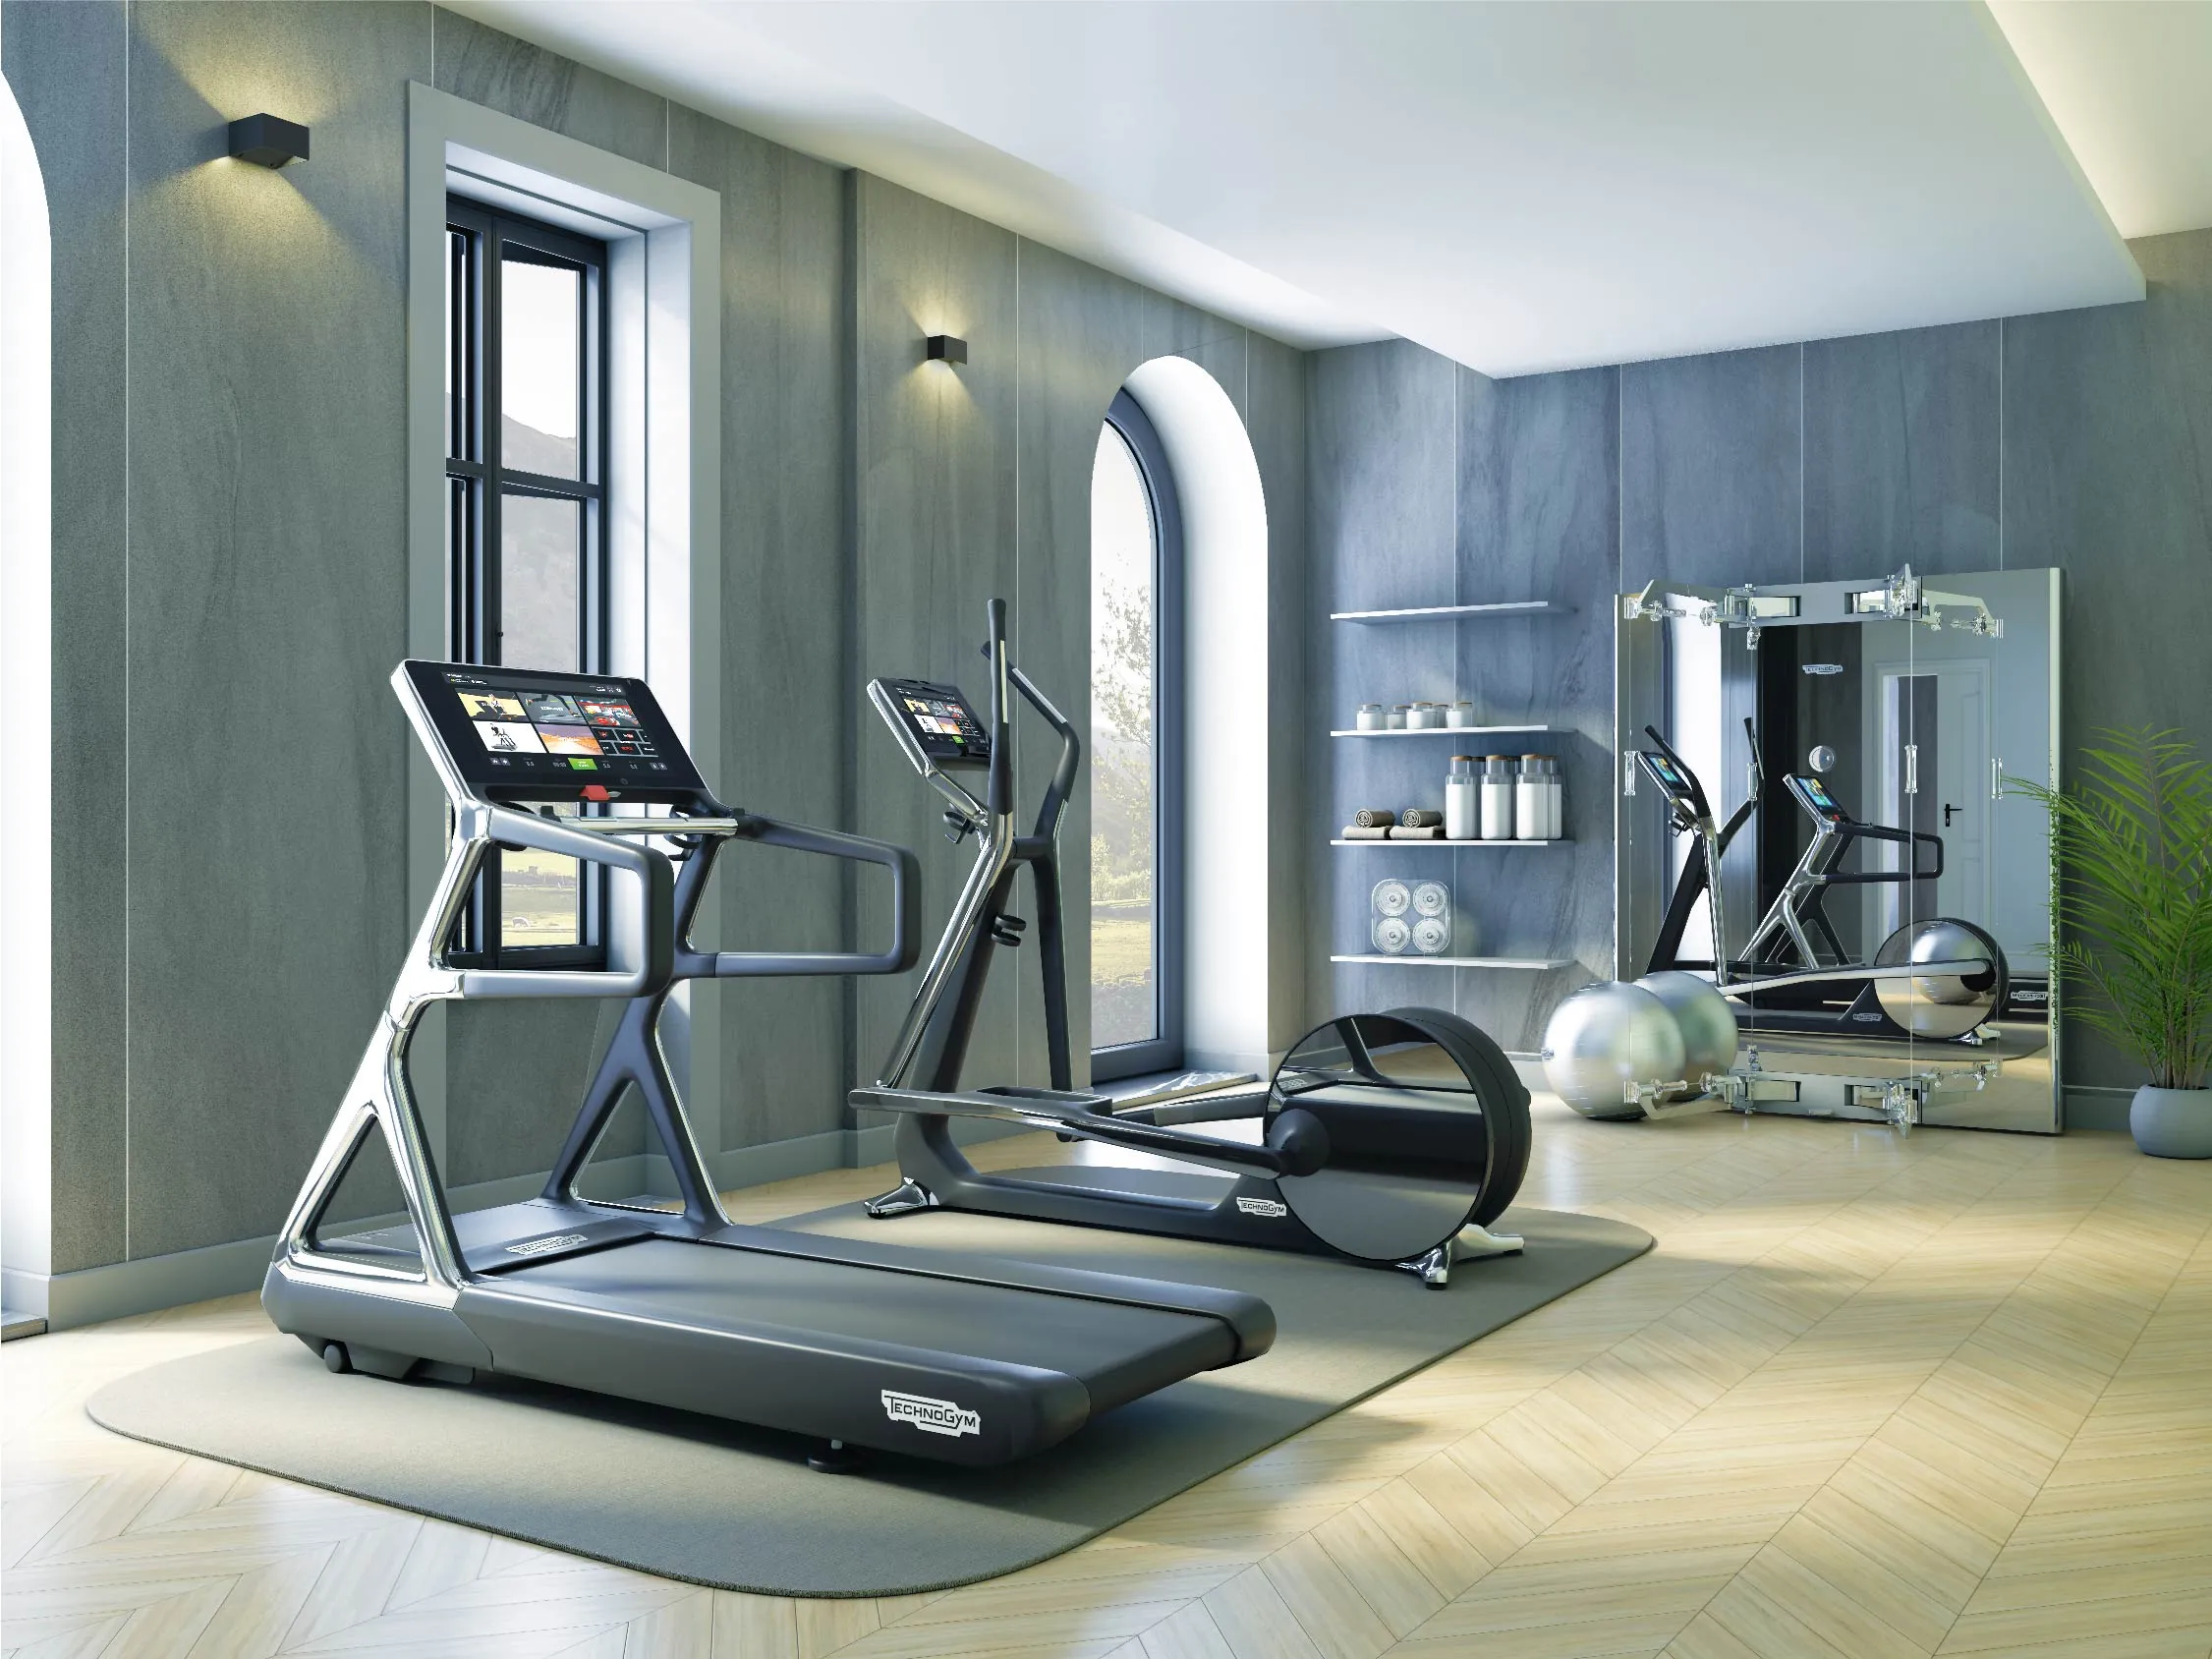 Home gym Set up at the Boubyan customer's residence with the help of Boubyan Gym Equipment Finance.